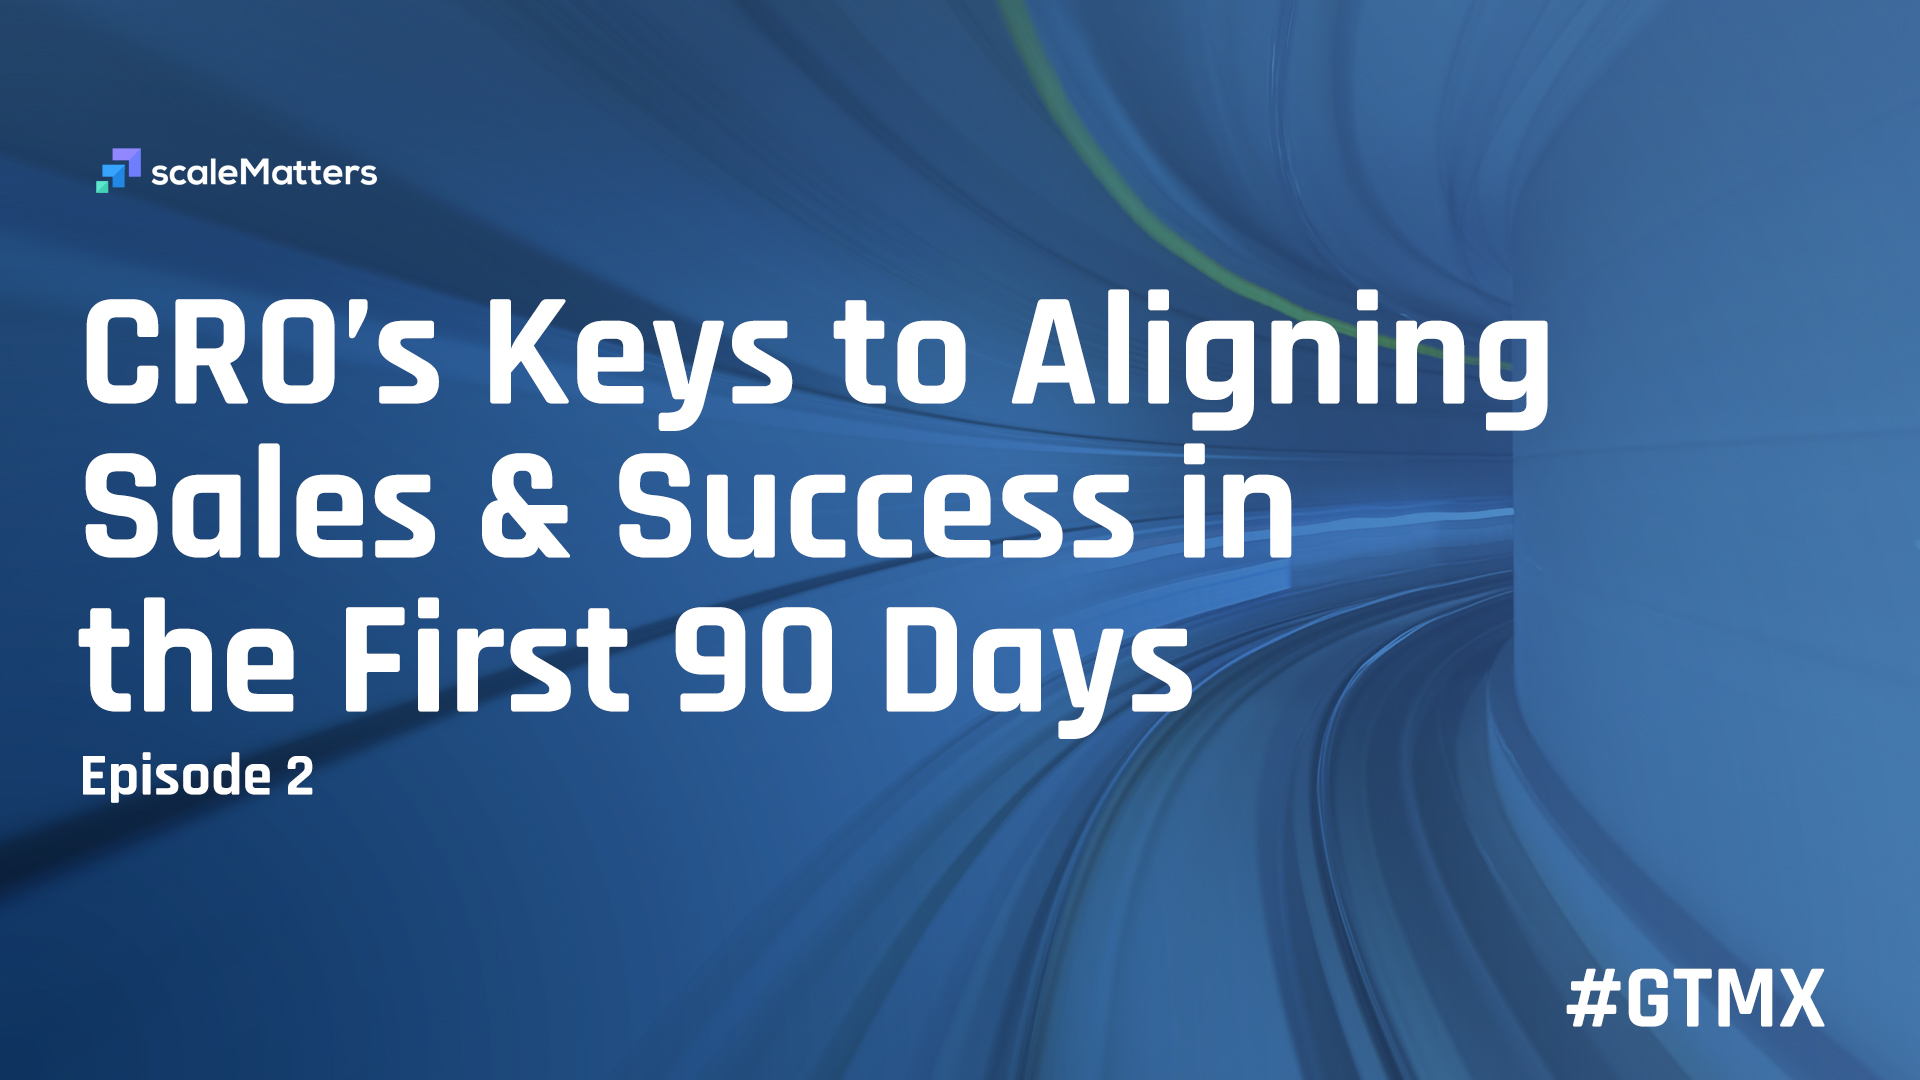 CRO's Keys to Aligning Sales & Success in First 90 Days